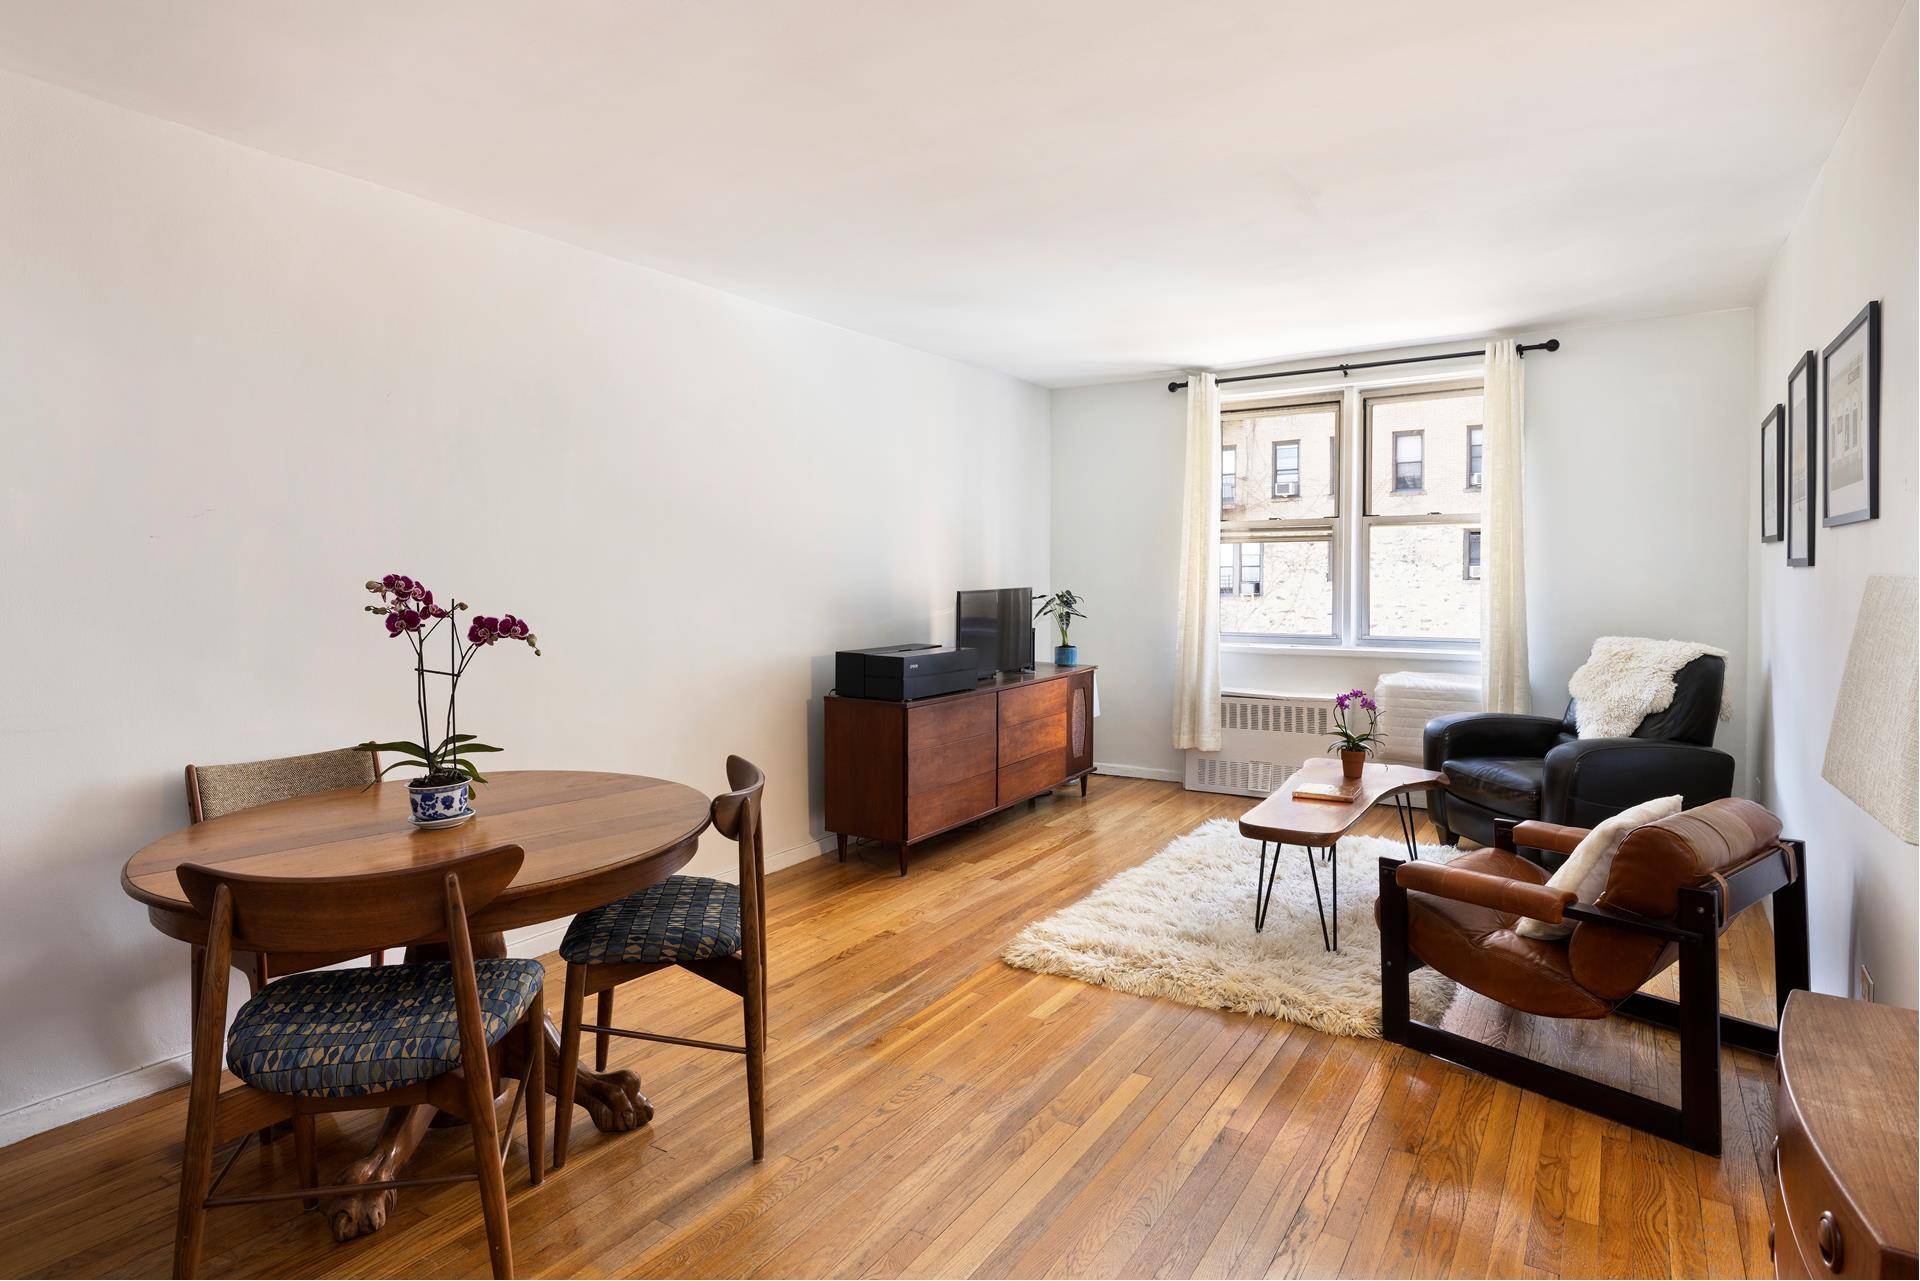 Welcome home to this bright renovated one bedroom home in the highly regarded 100 Overlook Terrace.